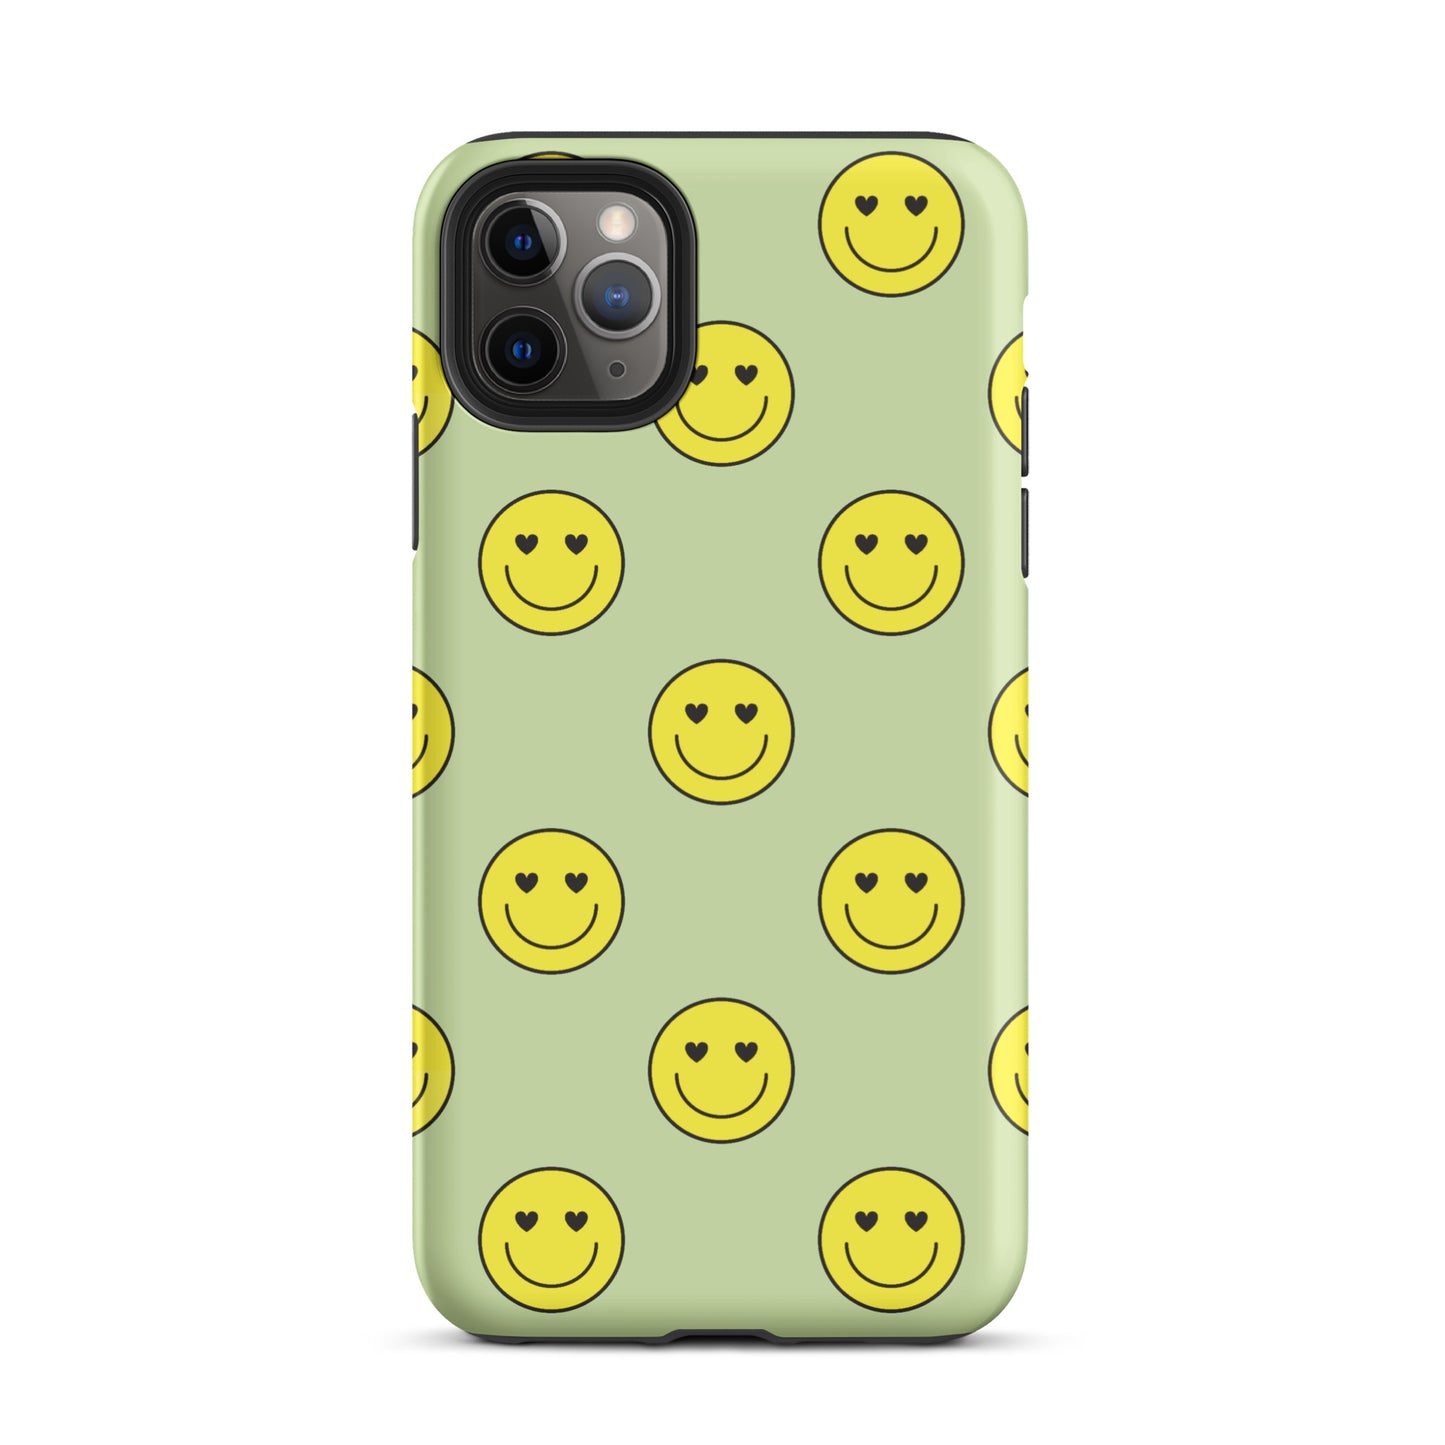 Neon Smiley Faces iPhone Case iPhone 11 Pro Max Matte